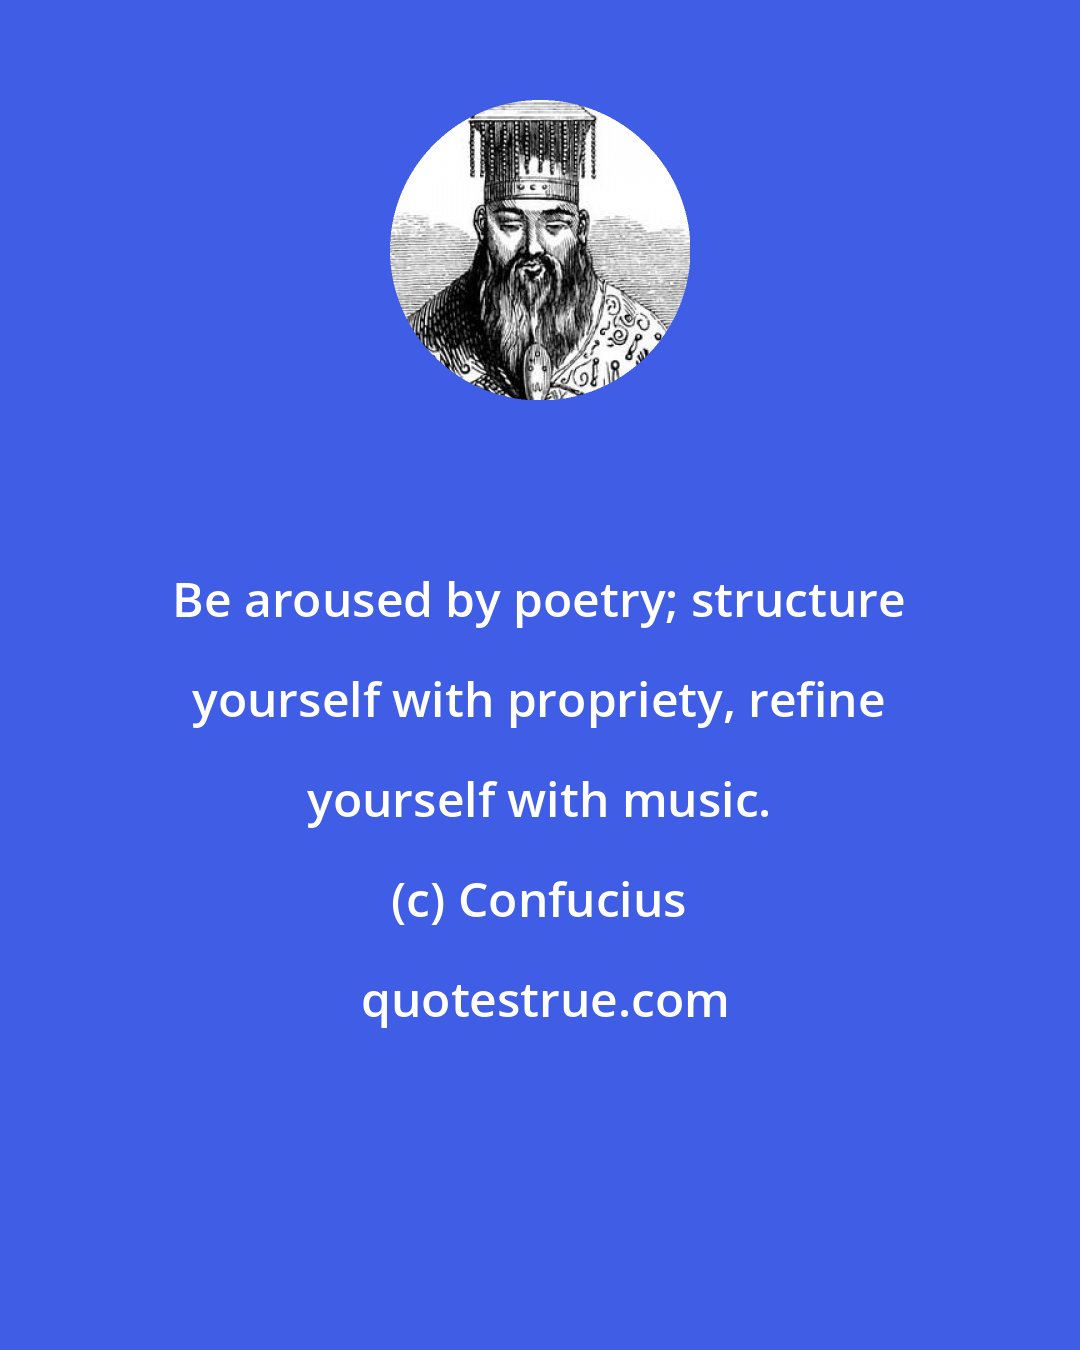 Confucius: Be aroused by poetry; structure yourself with propriety, refine yourself with music.